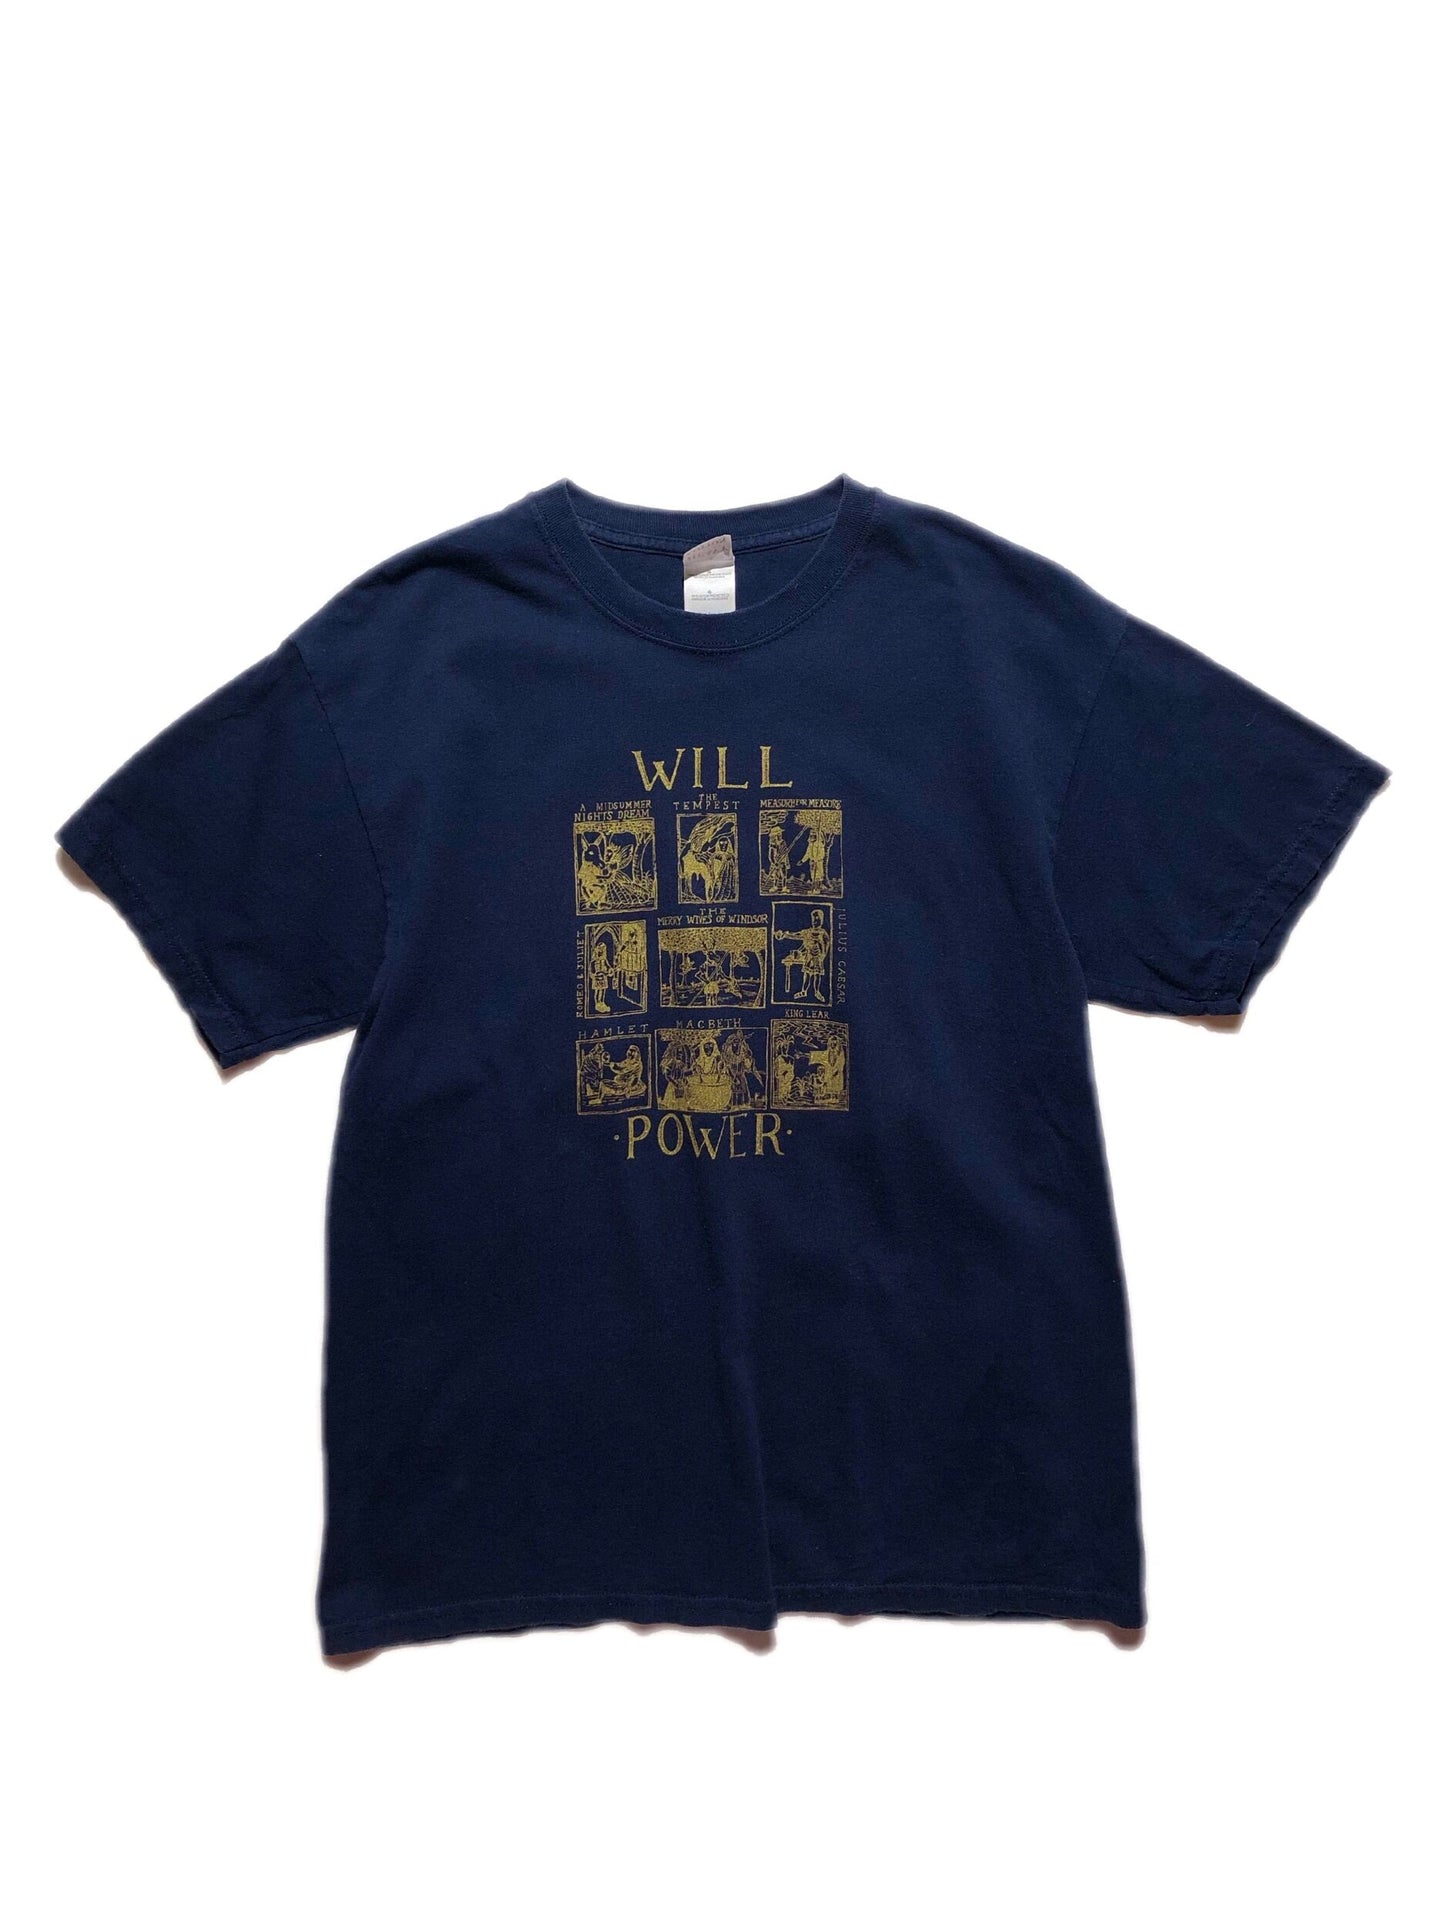 Vintage Will Power T-Shirt